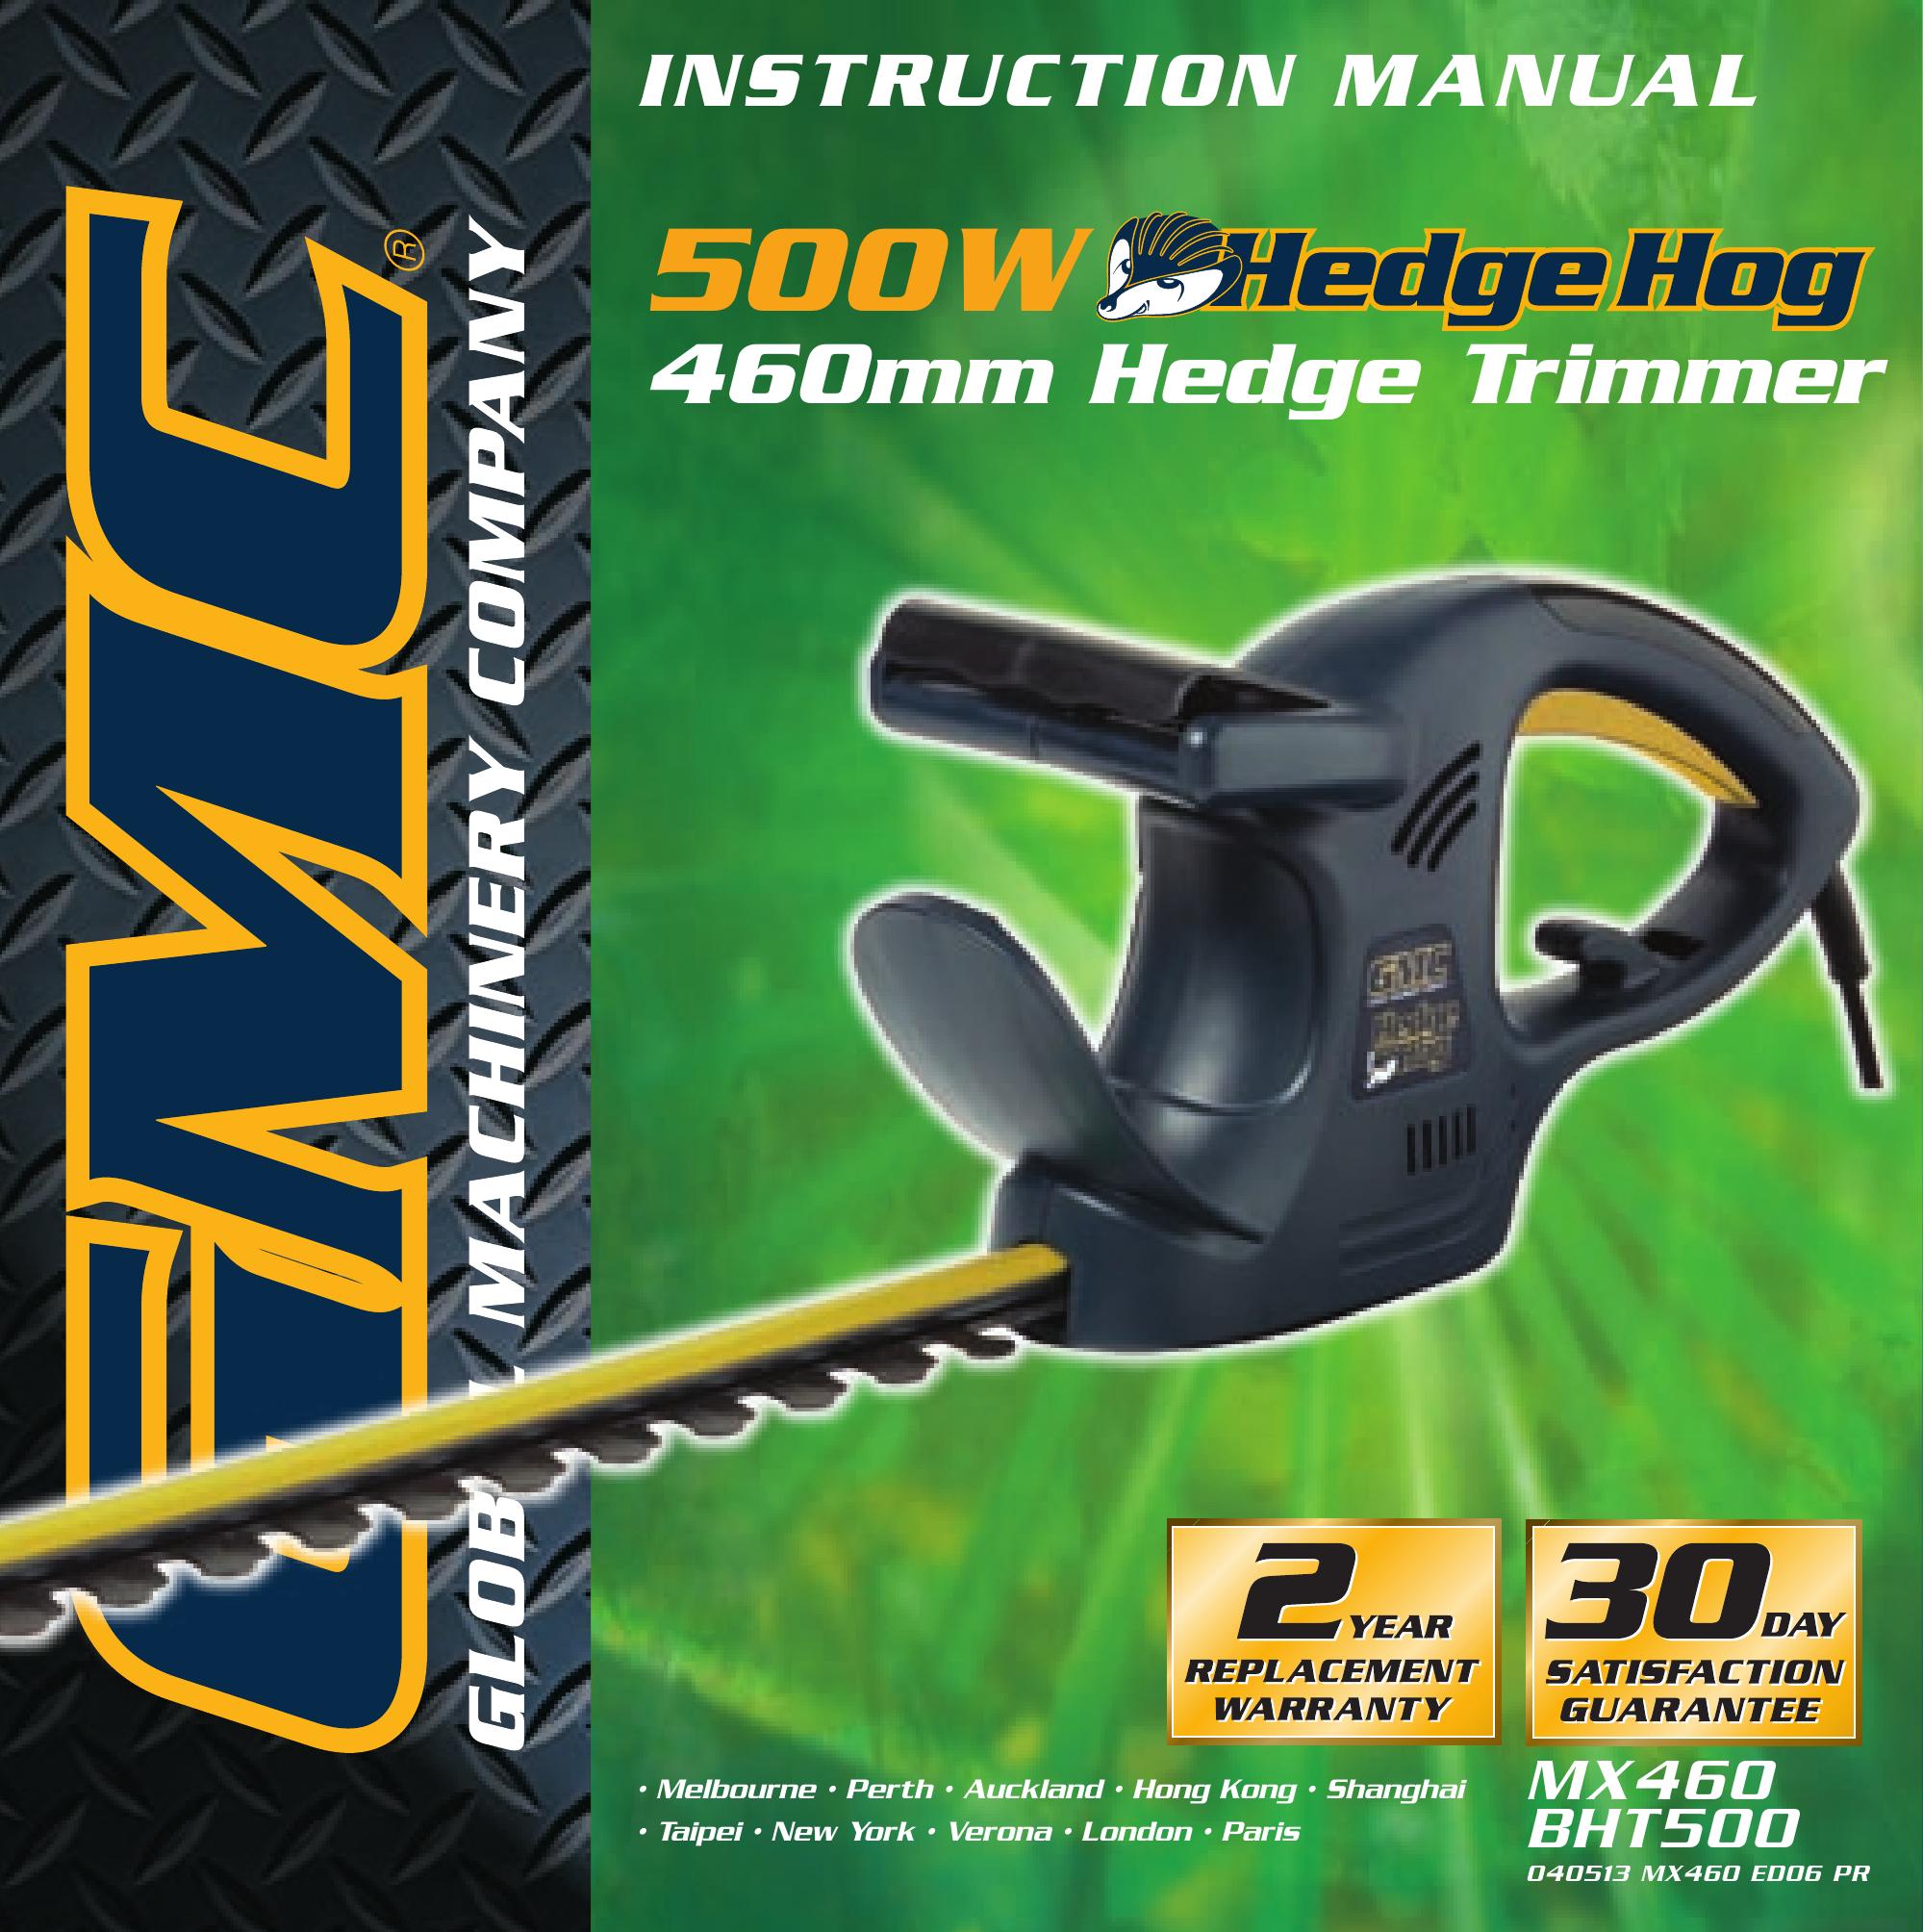 Global Machinery Company BHT500 Trimmer User Manual